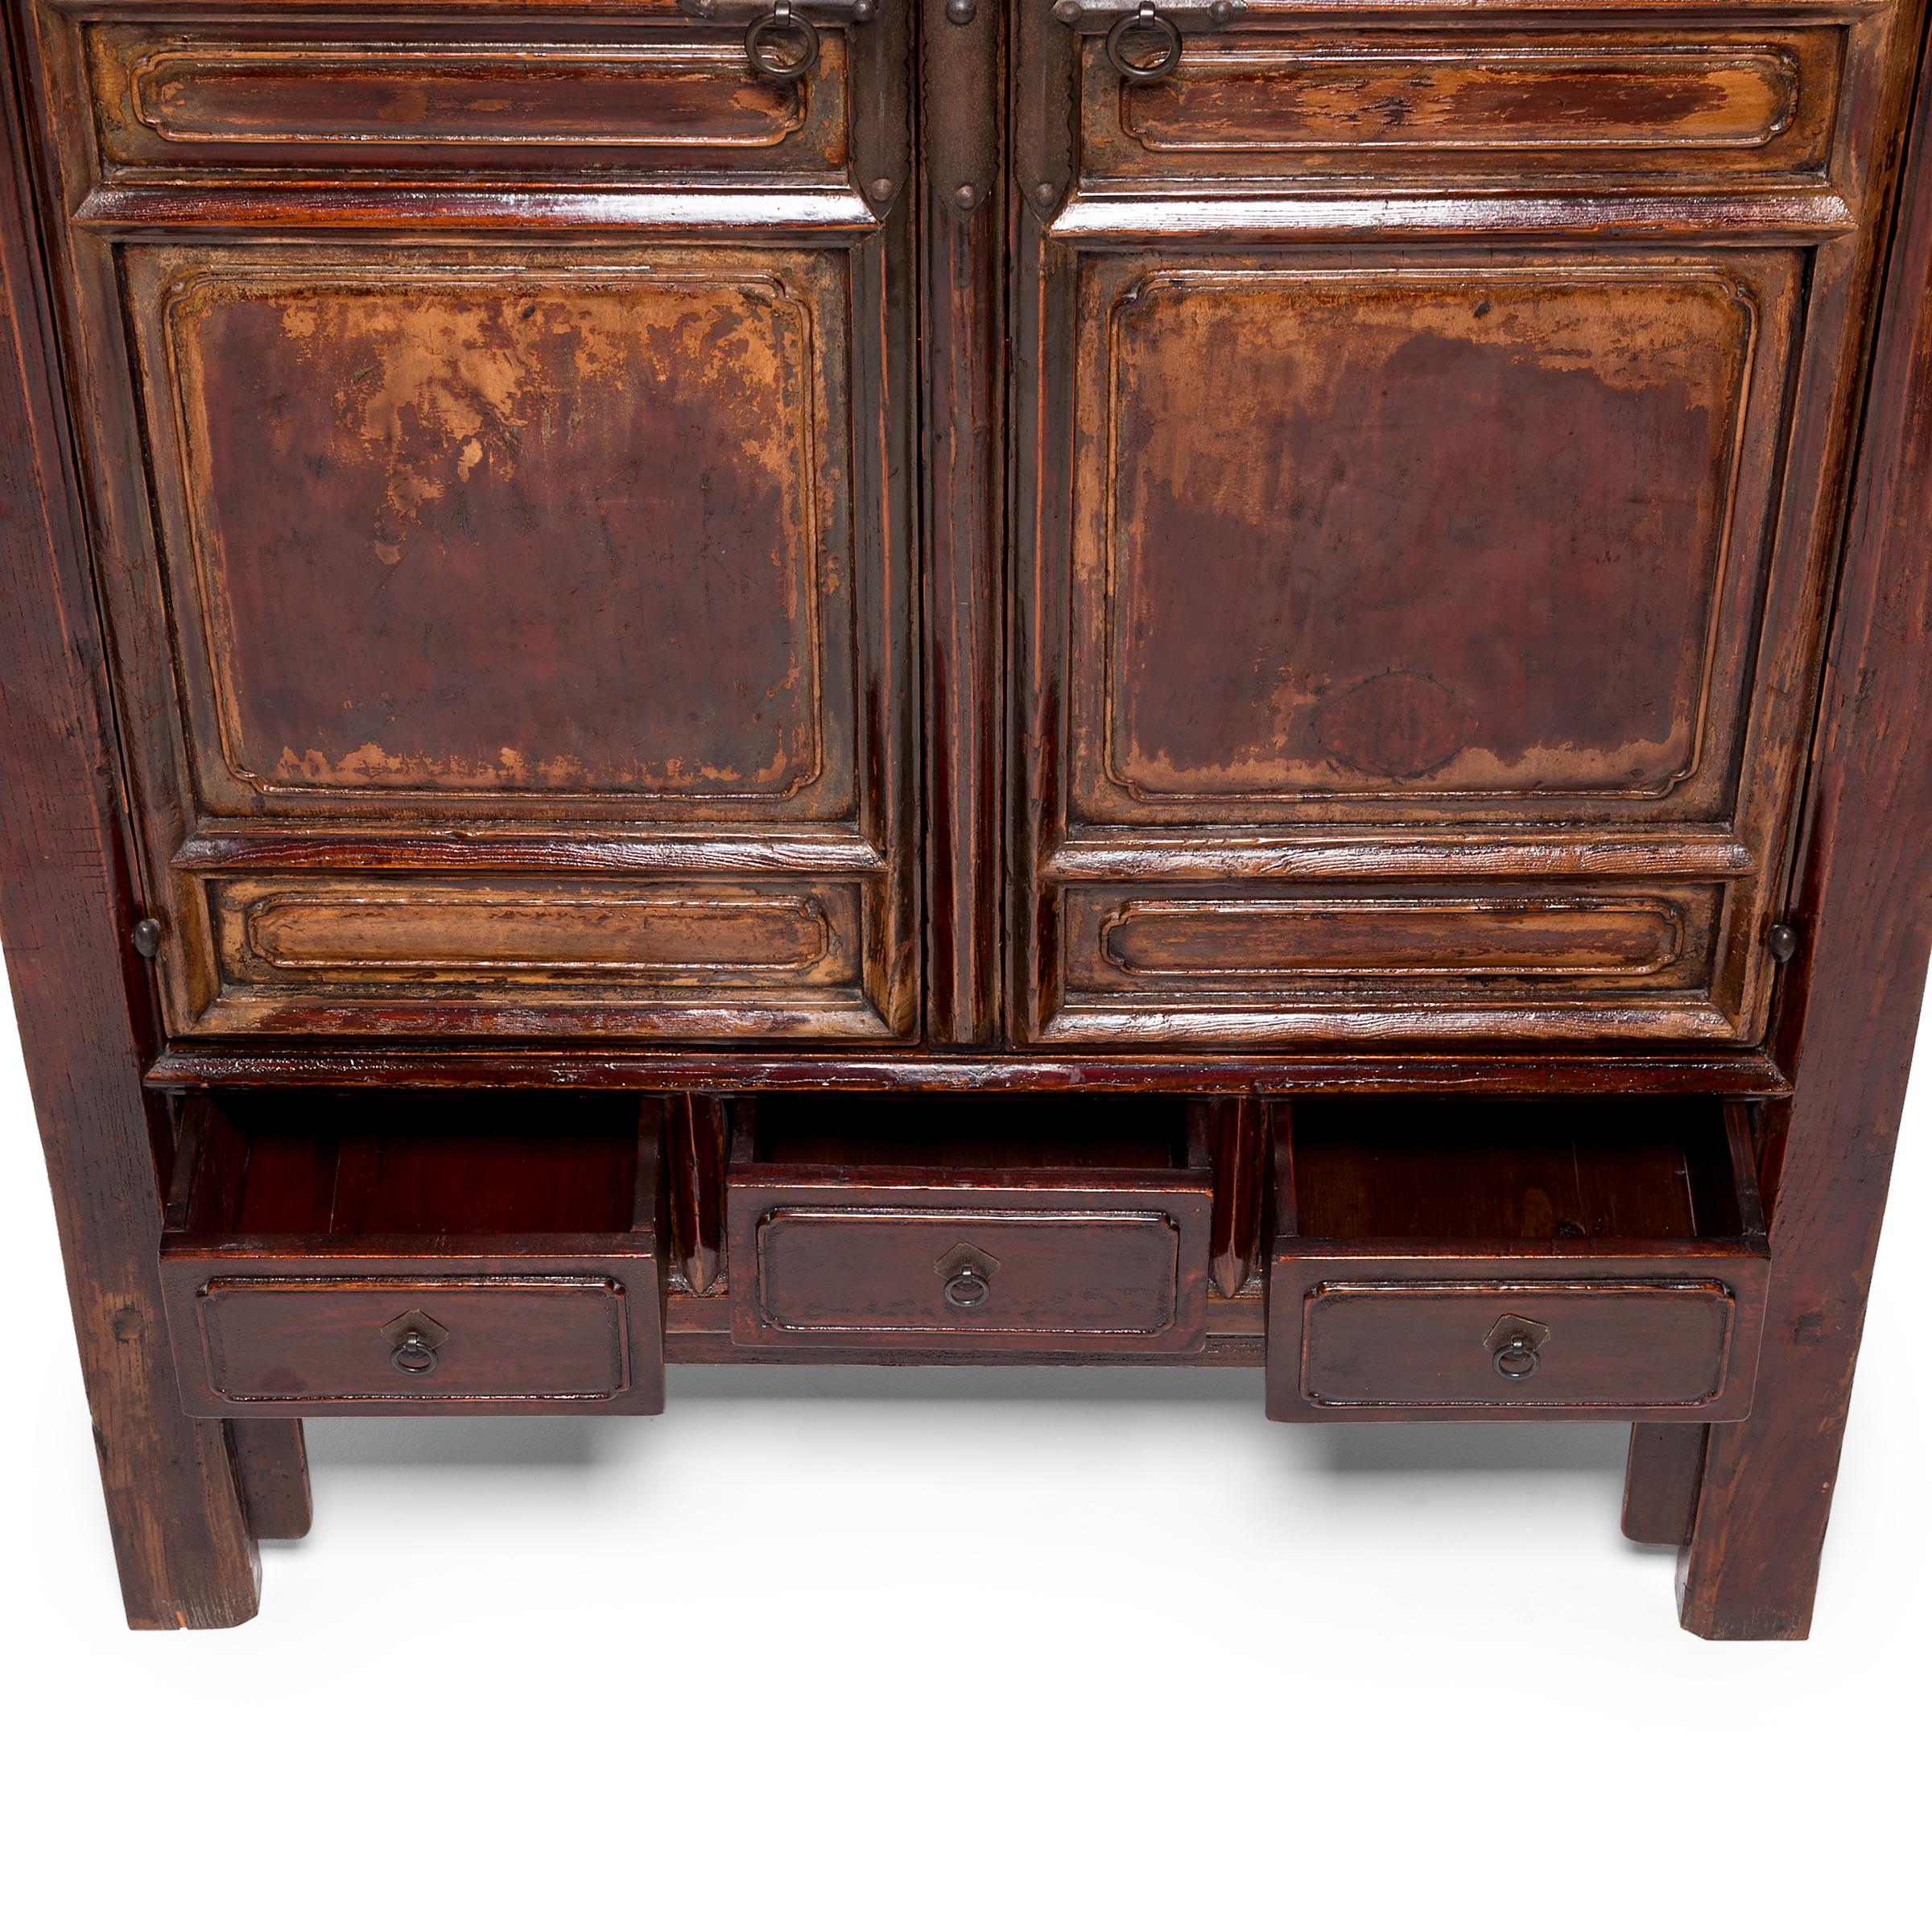 Chinese Paneled Storage Cabinet, c. 1650 In Good Condition For Sale In Chicago, IL